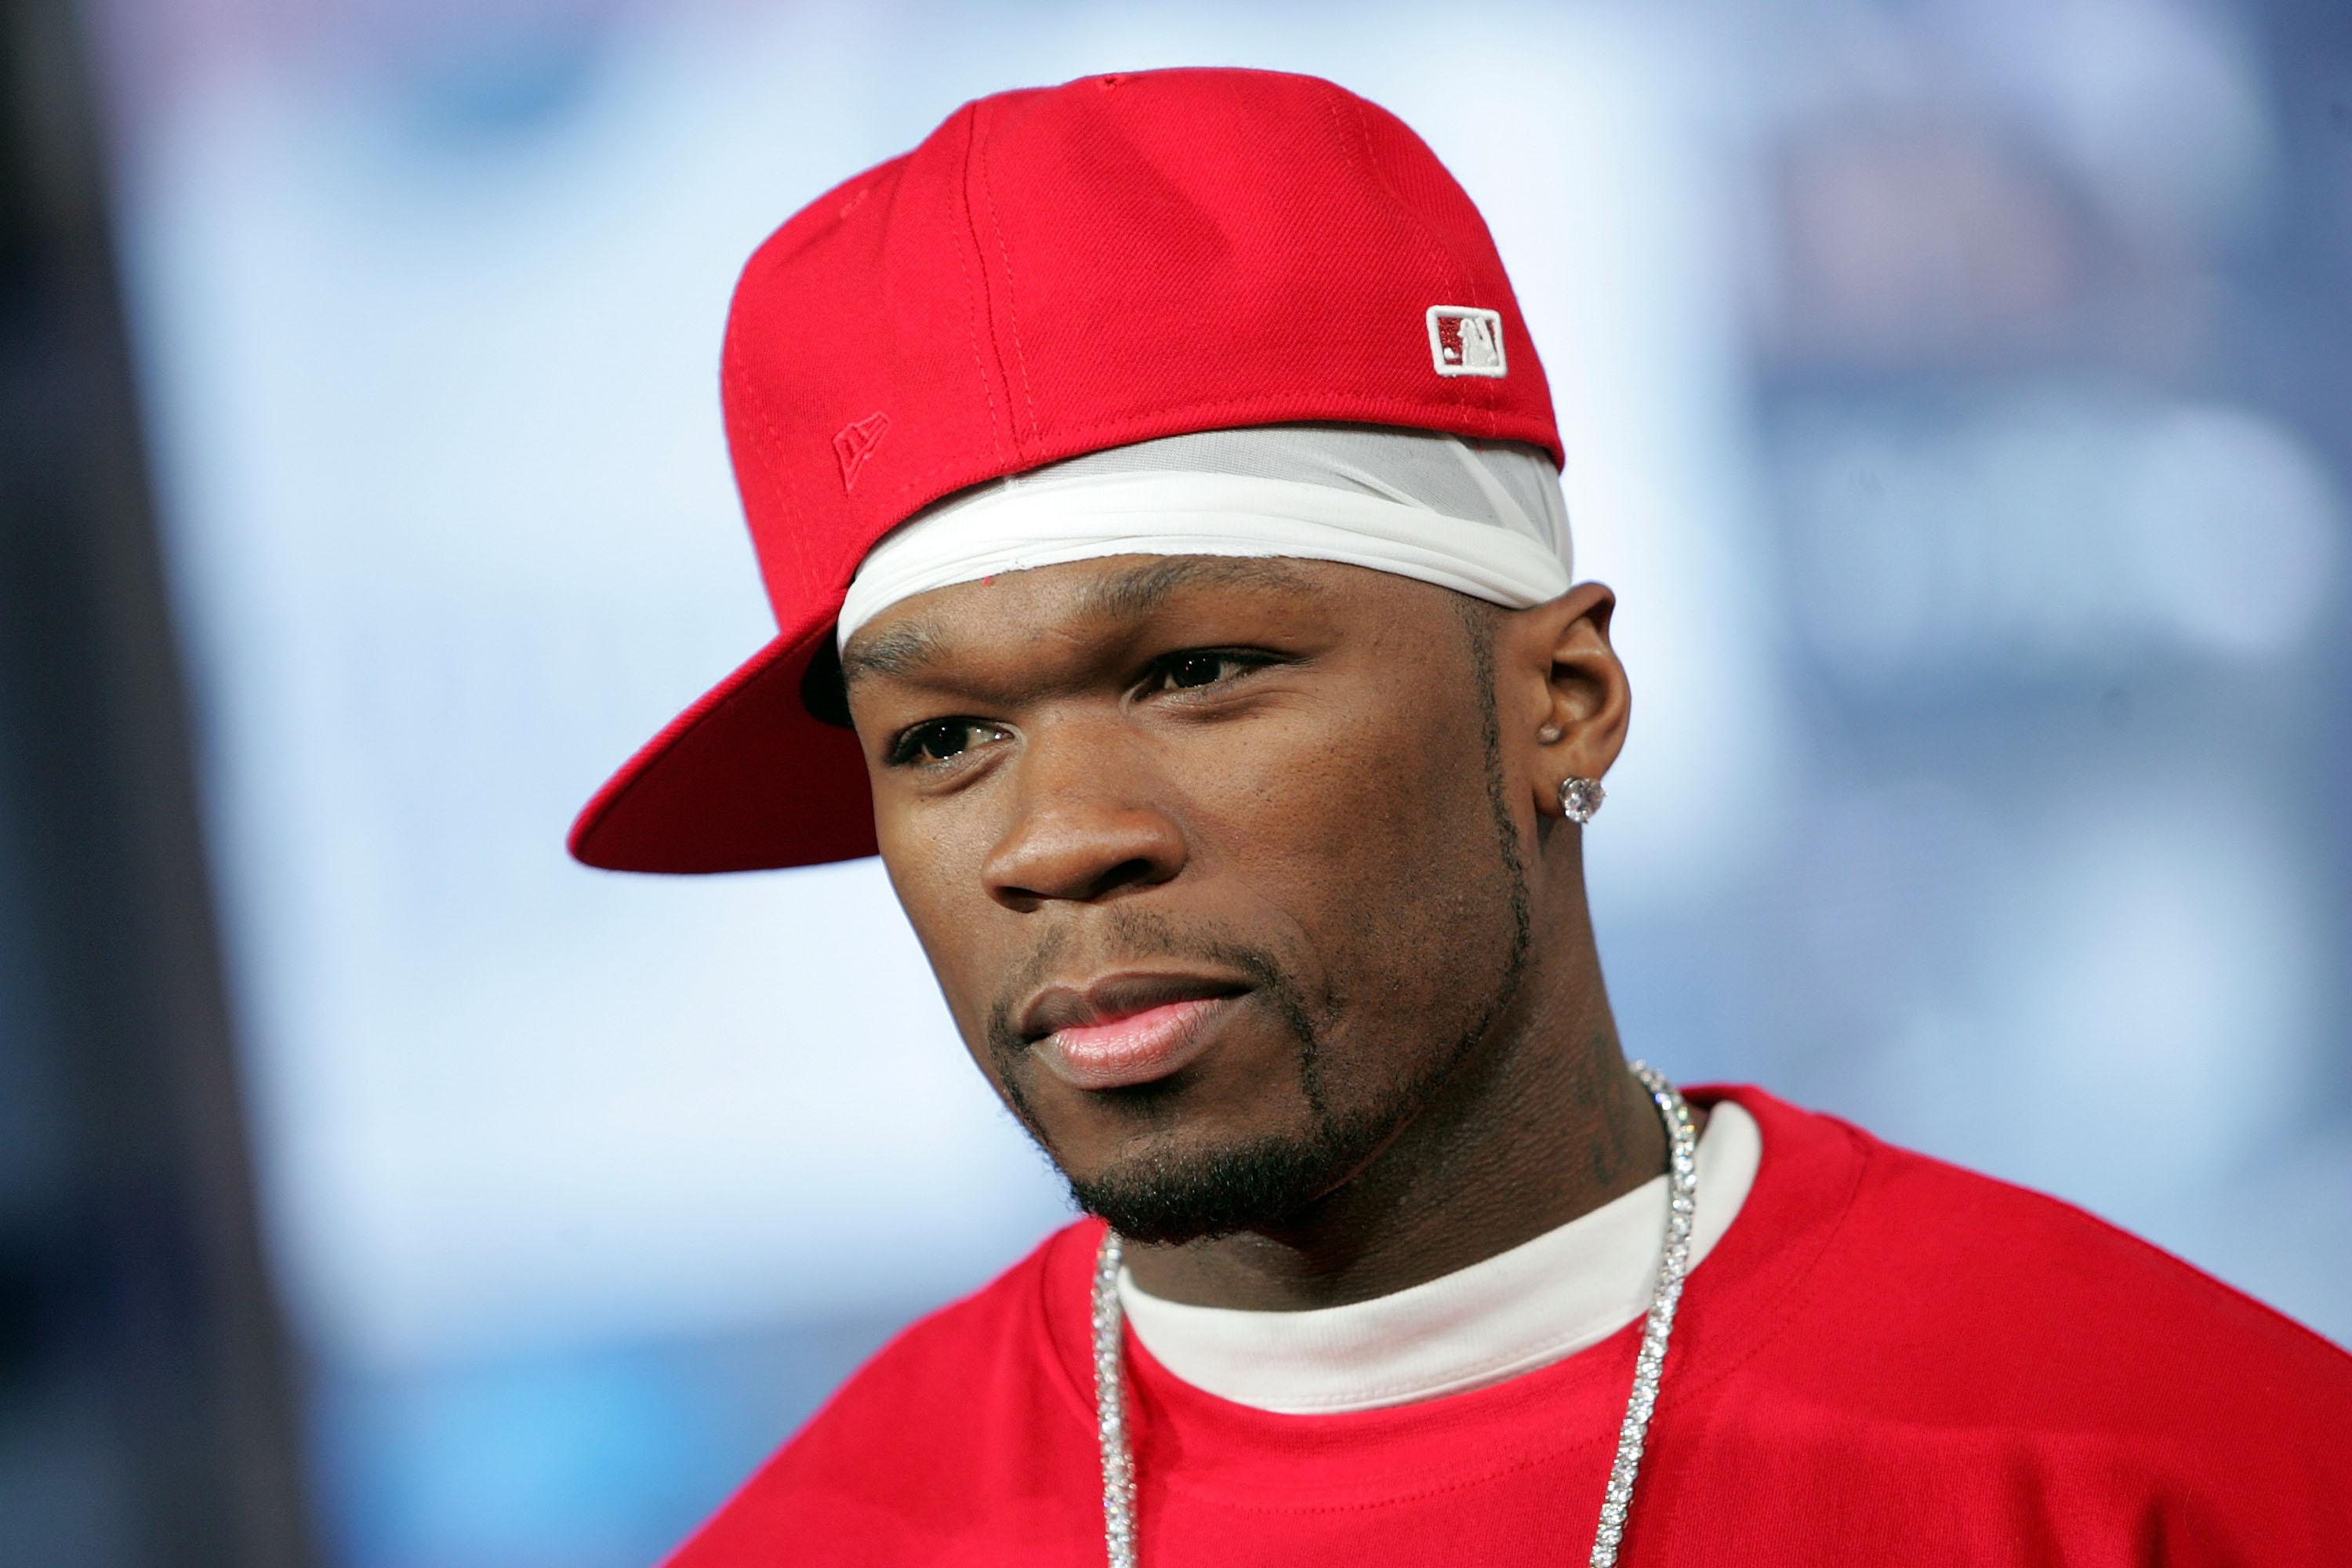 What do you think about #50Cent's acquisition of the iconic